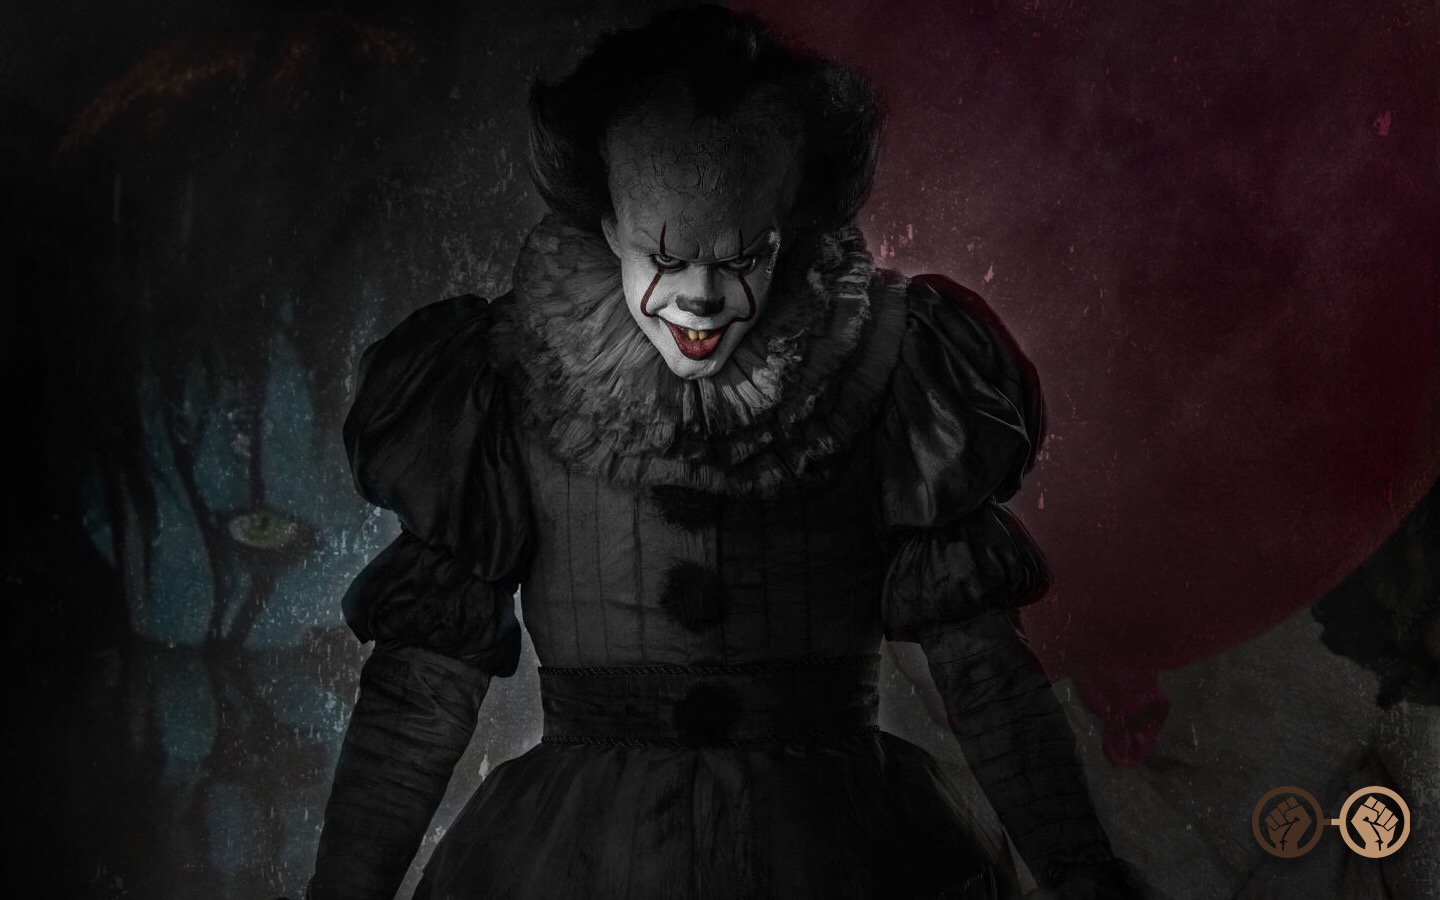 GoC 101: Pennywise the Clown